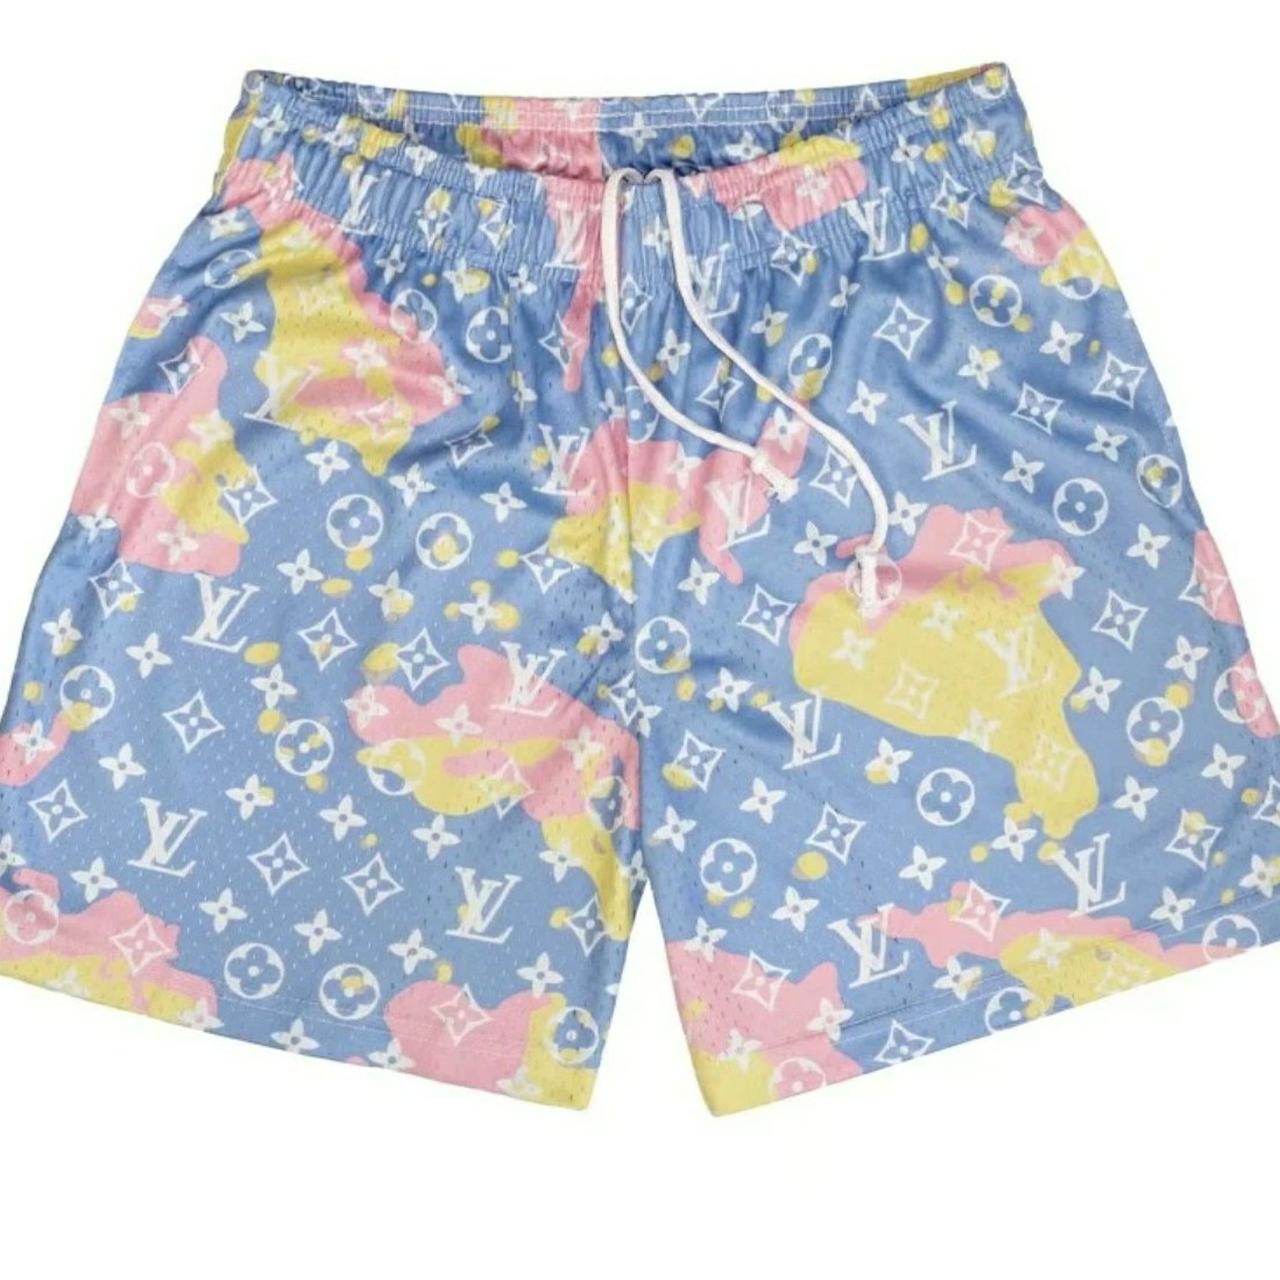 I have this NY Yankees LV bravest studios shorts in